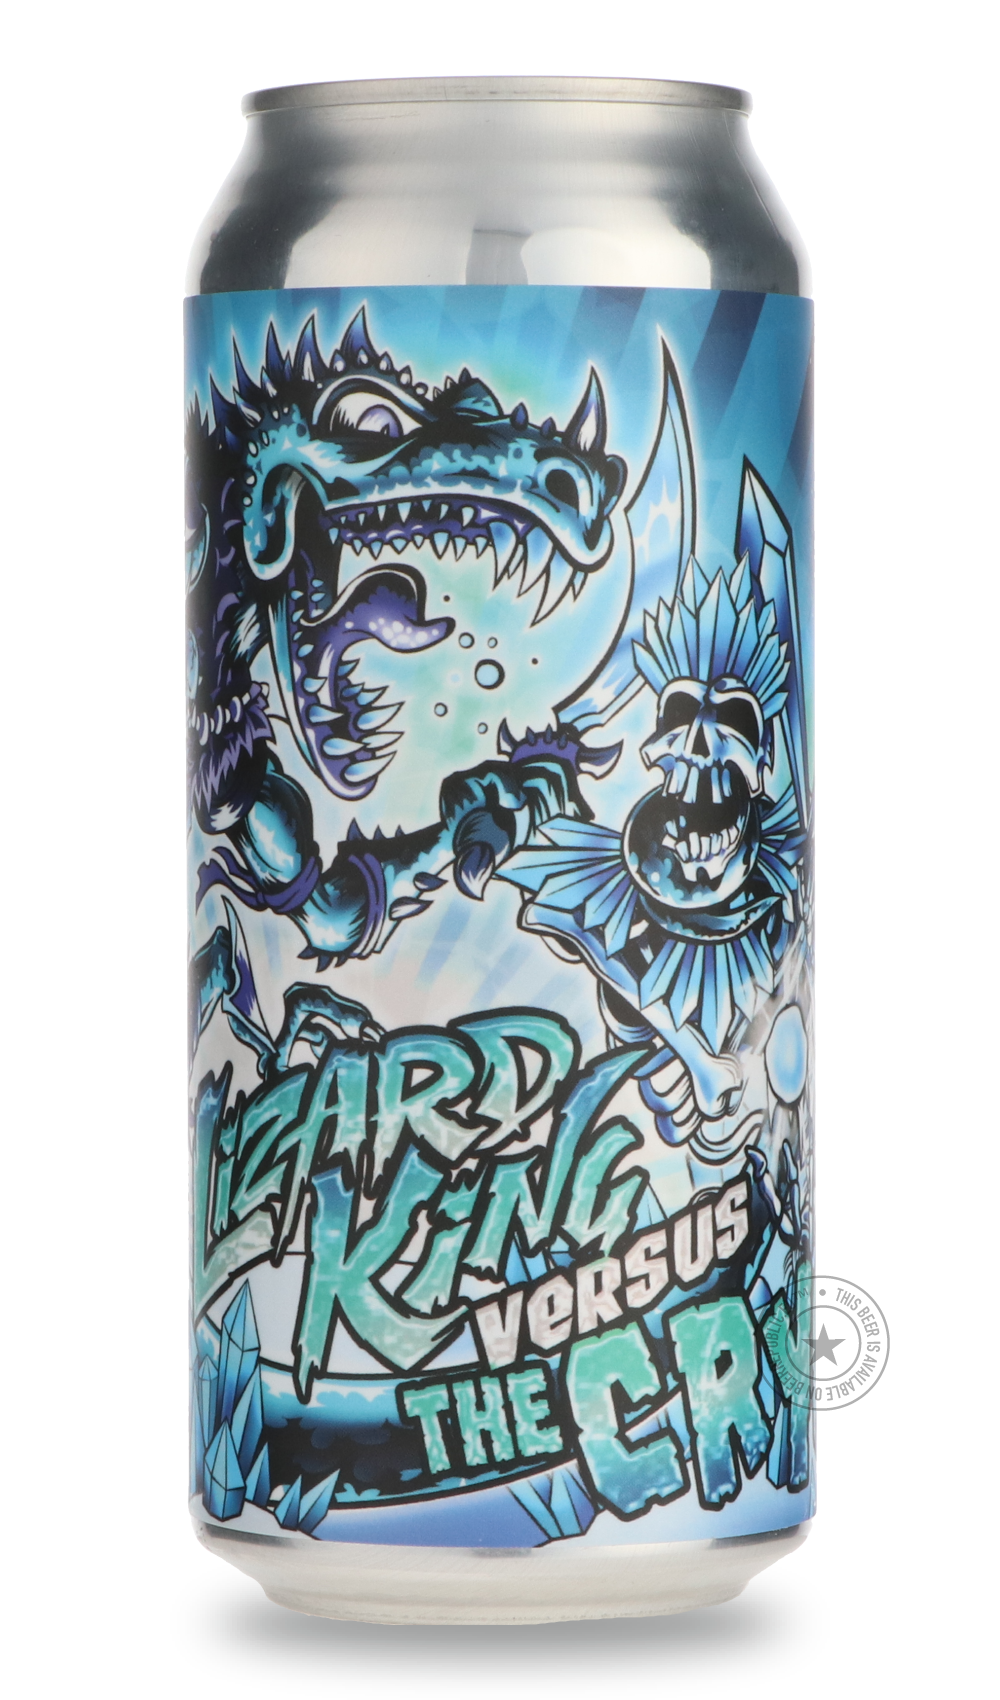 -Pipeworks- Lizard King versus The Cryo-Pale- Only @ Beer Republic - The best online beer store for American & Canadian craft beer - Buy beer online from the USA and Canada - Bier online kopen - Amerikaans bier kopen - Craft beer store - Craft beer kopen - Amerikanisch bier kaufen - Bier online kaufen - Acheter biere online - IPA - Stout - Porter - New England IPA - Hazy IPA - Imperial Stout - Barrel Aged - Barrel Aged Imperial Stout - Brown - Dark beer - Blond - Blonde - Pilsner - Lager - Wheat - Weizen - 